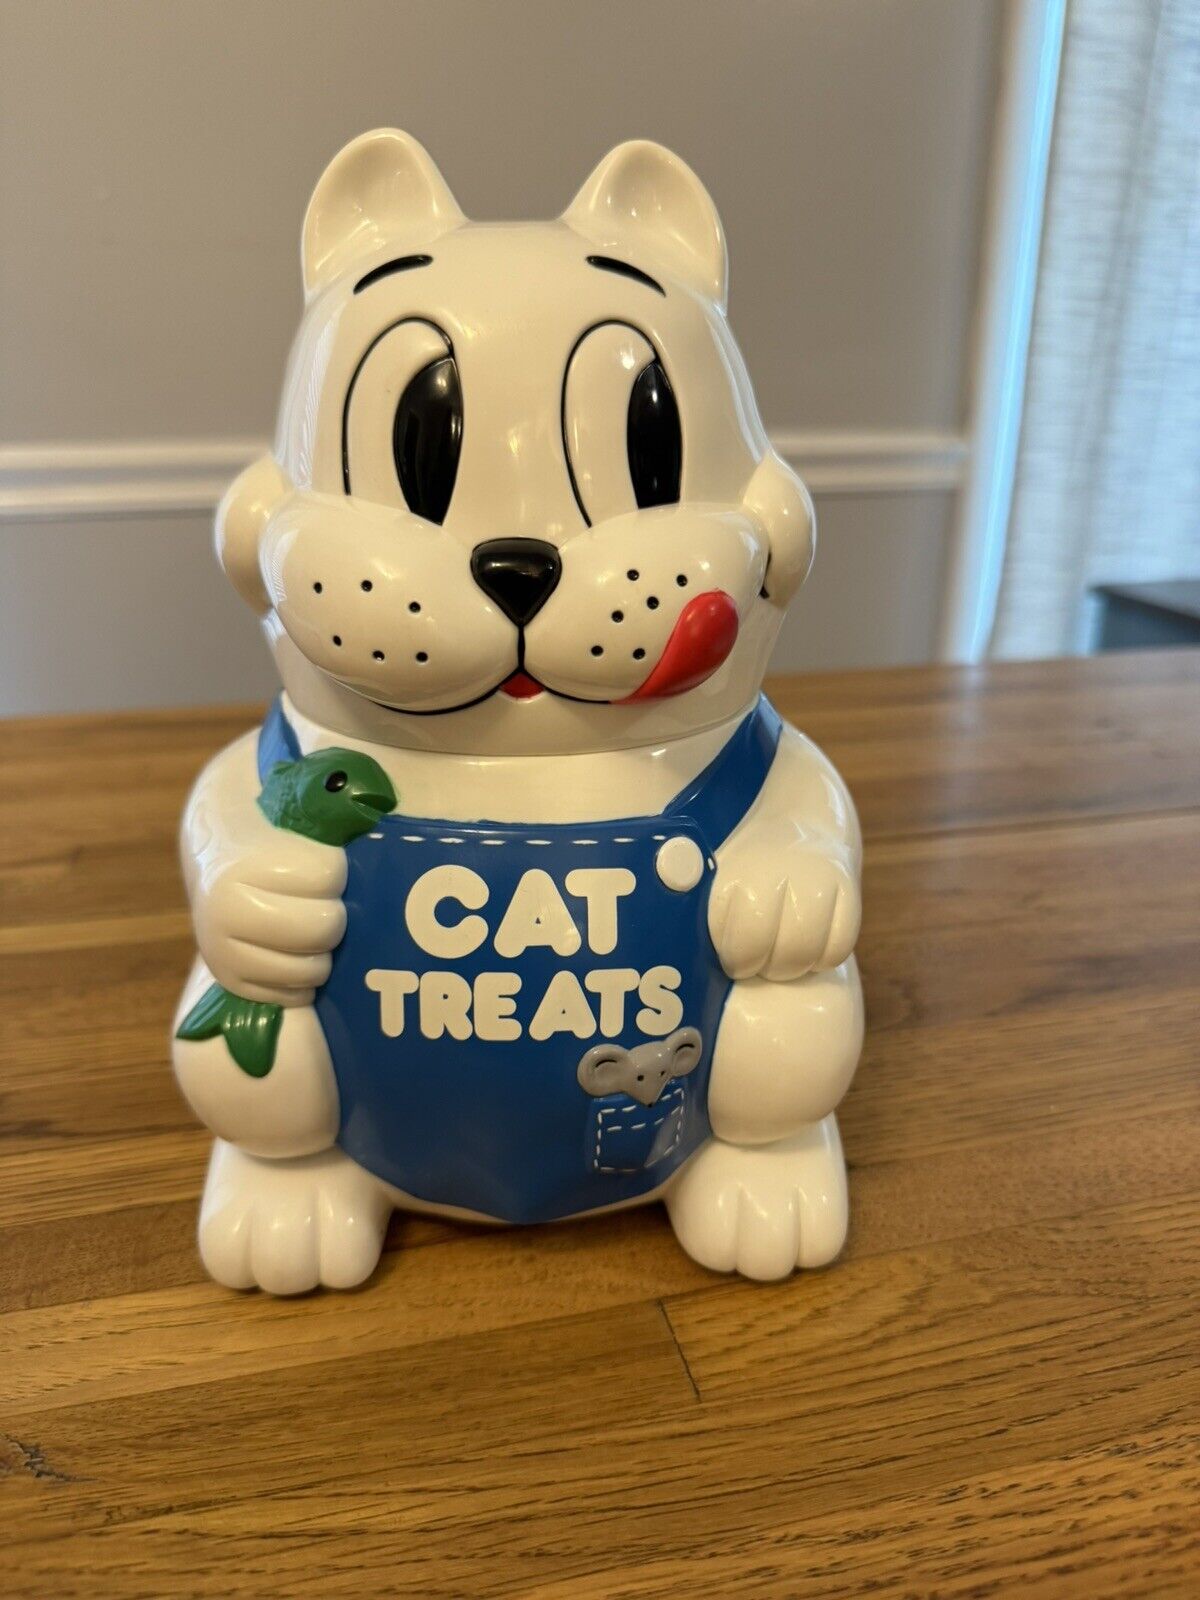 Vintage 1992 “Meowing” Cat Treat Cookie Jar White Plastic 9” X 6” - TESTED